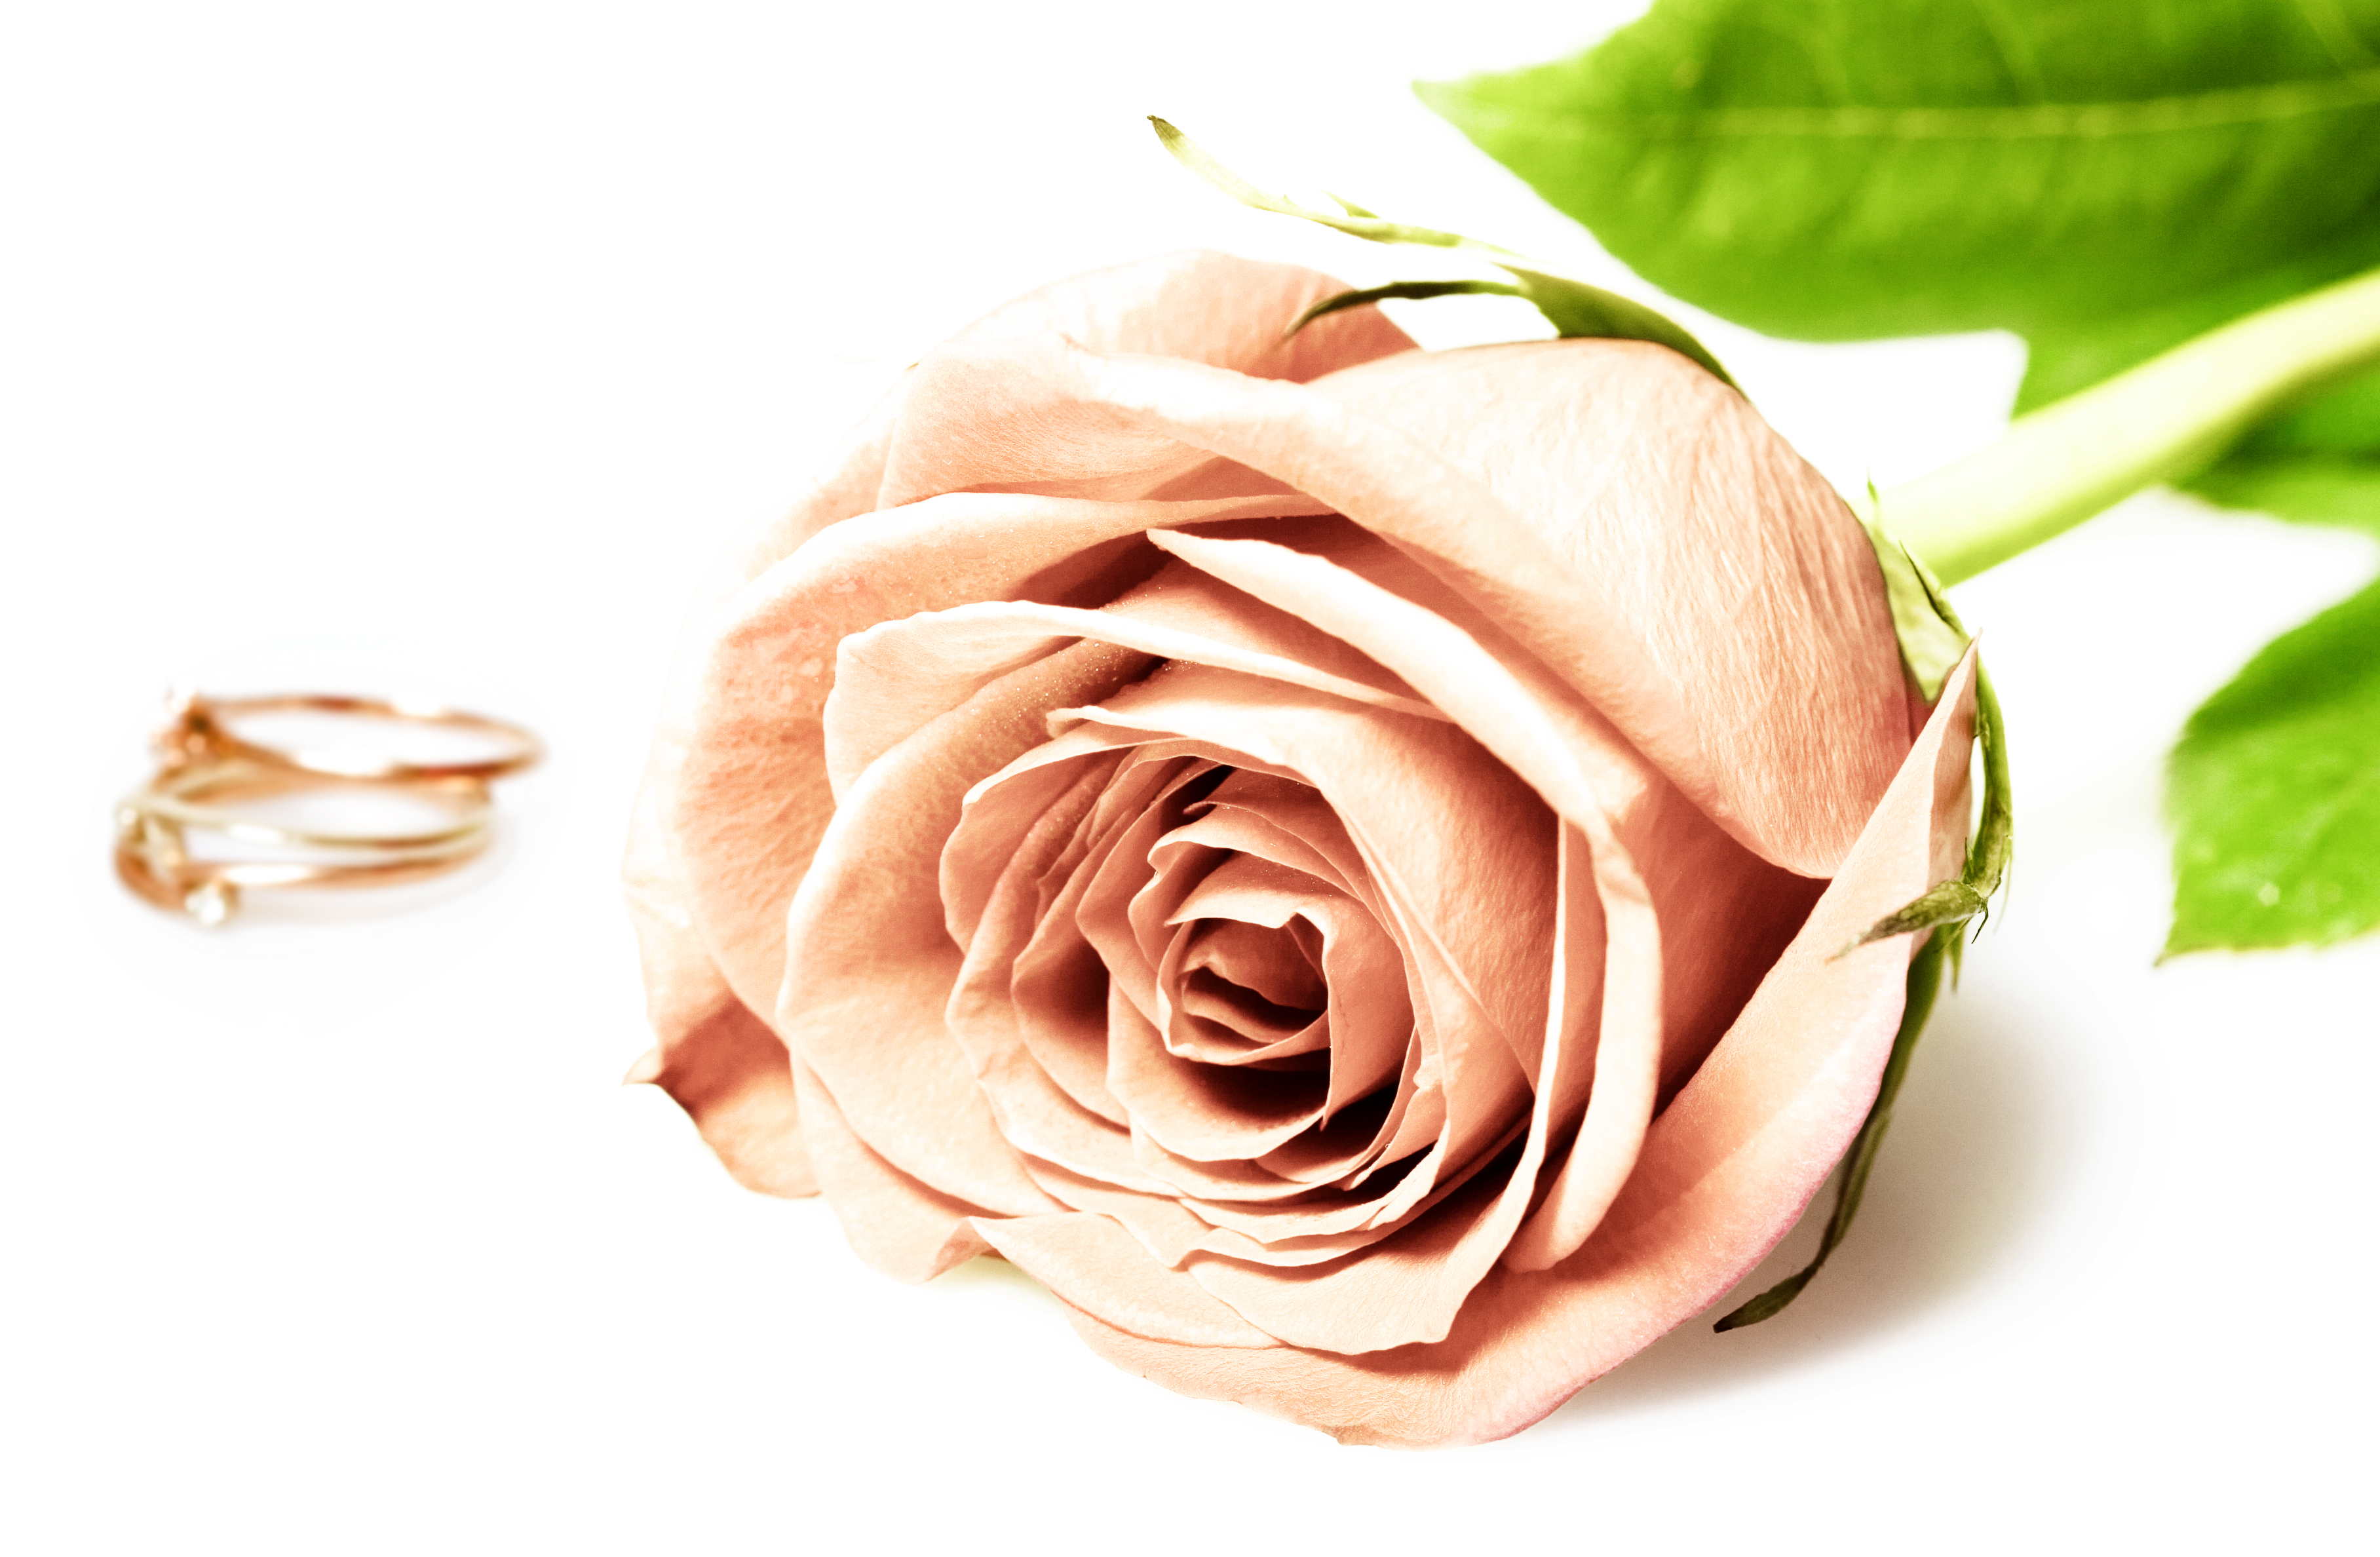 Wedding rings with rose photo